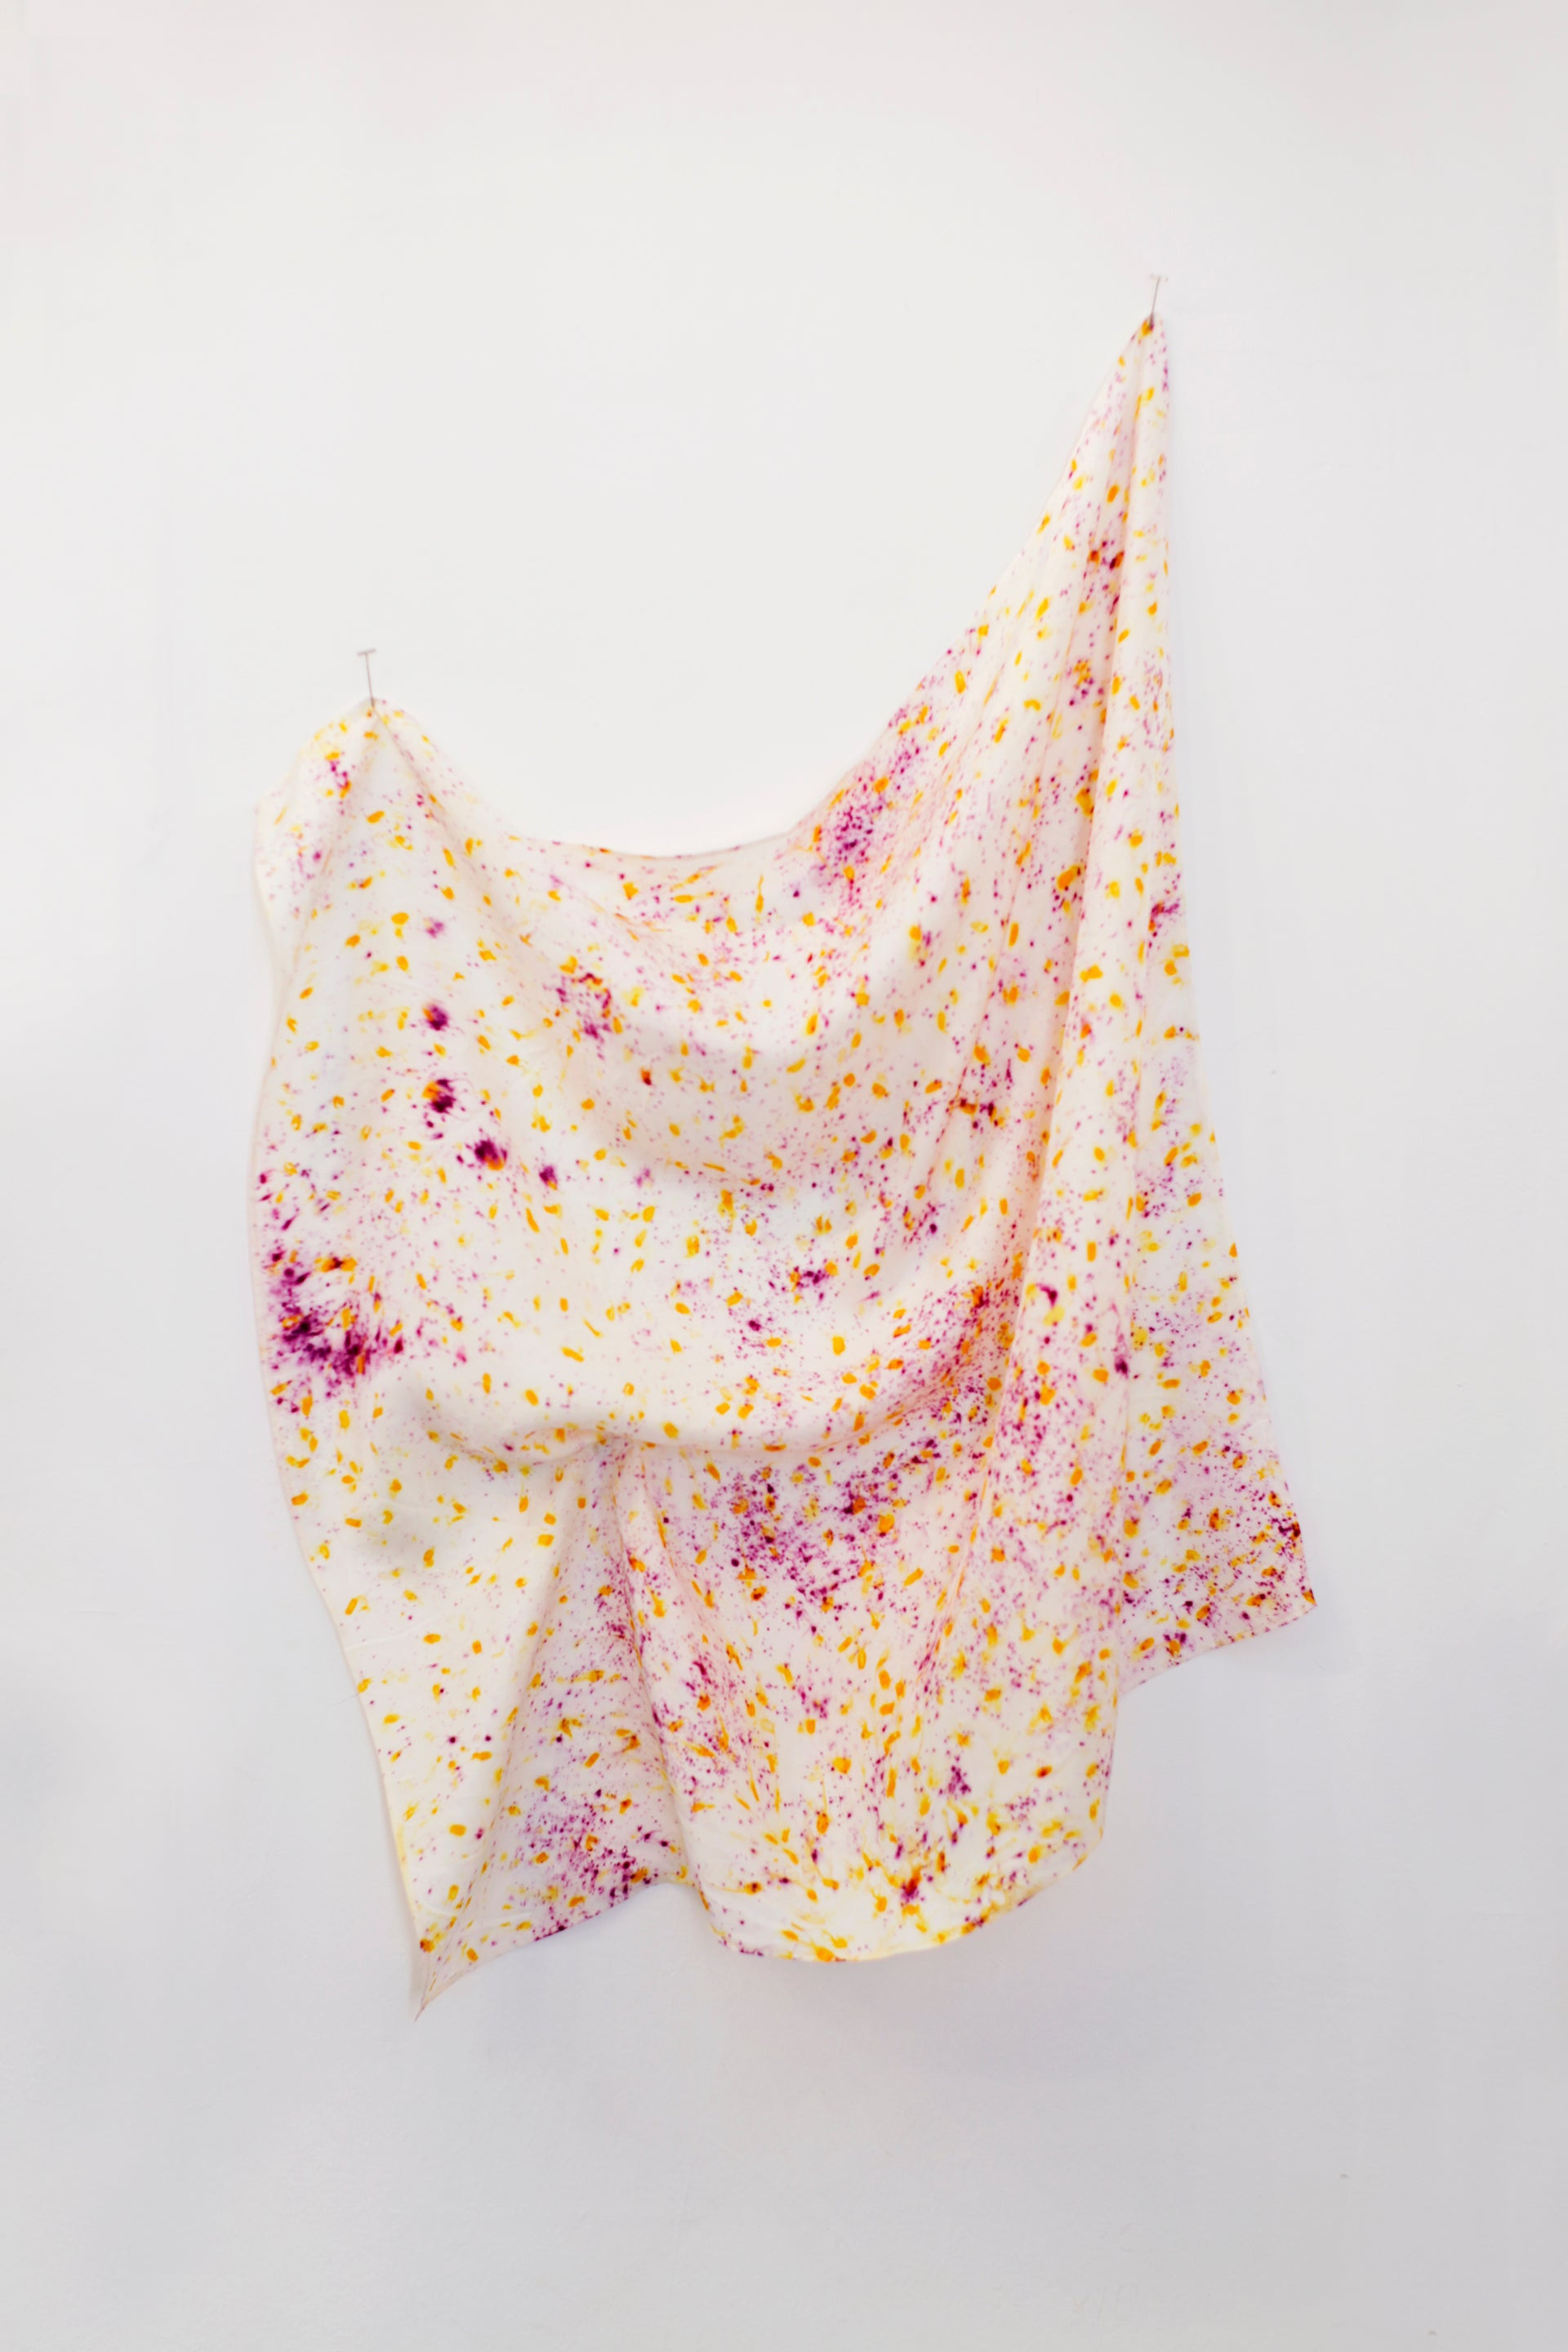 FLOWER PETAL PRINTED SILK SCARF - WILD HARVESTED COTA TINCTORIA AND COCHINEAL